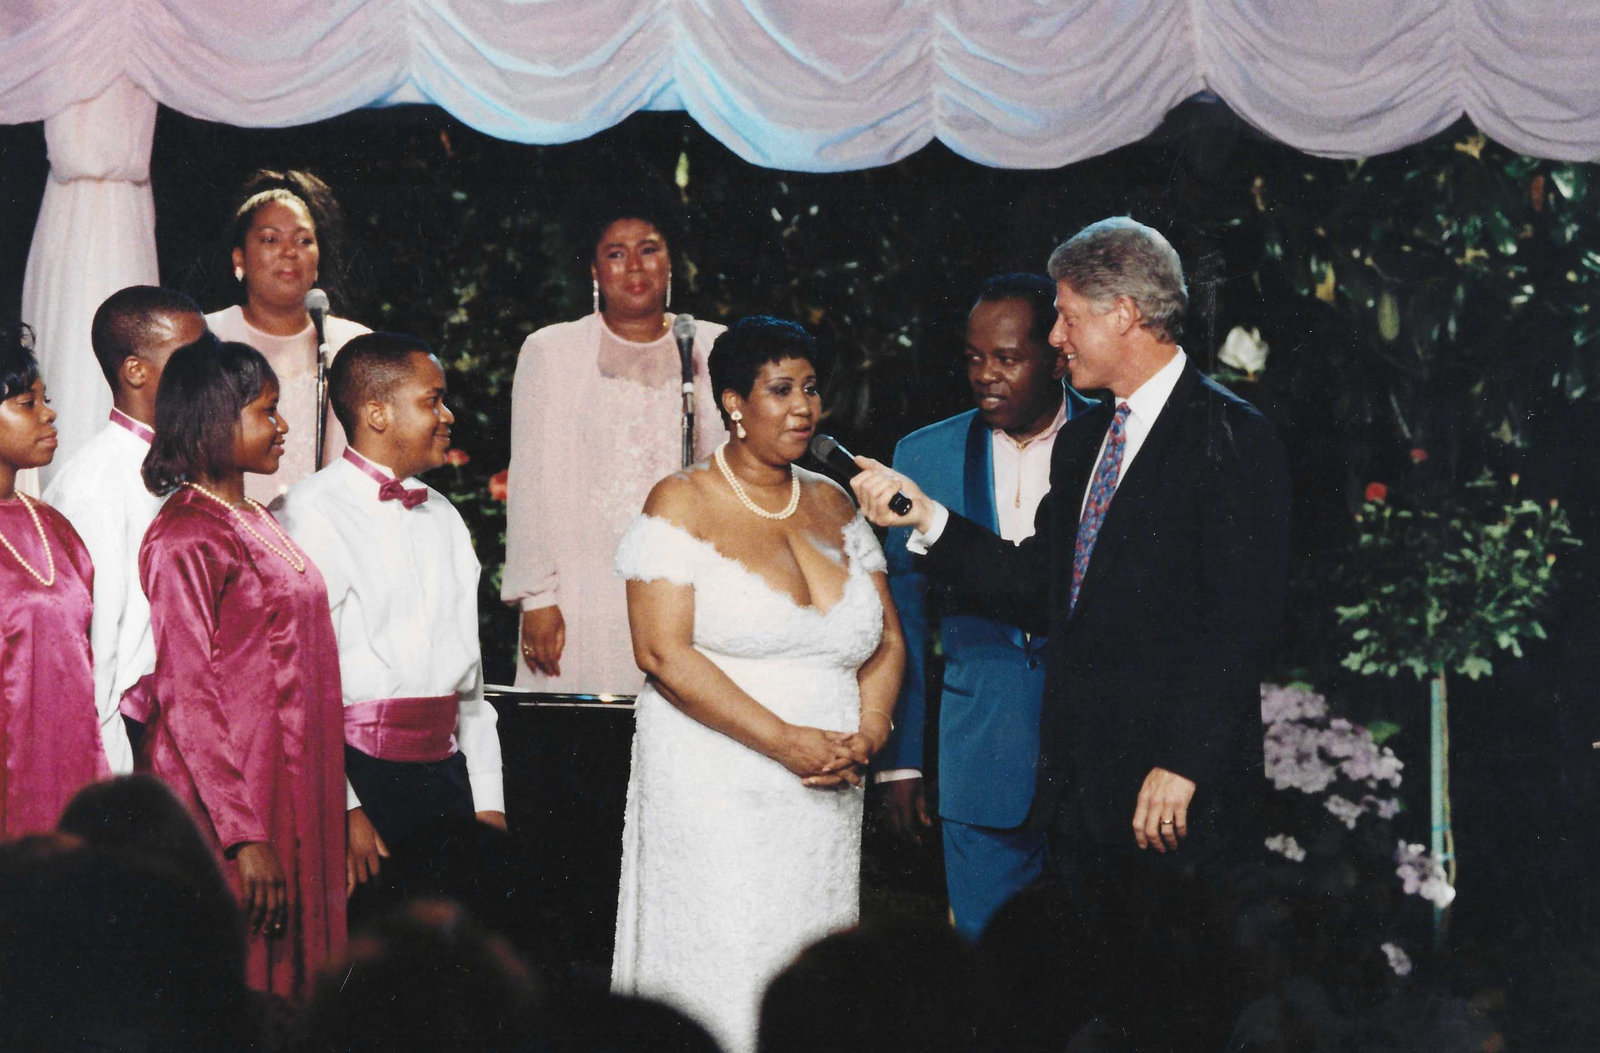 June 20, 1994 Eastern Choir with Aretha Franklin and Lou Rawls, In Performance at the White House, PBS special with President Bill Clinton